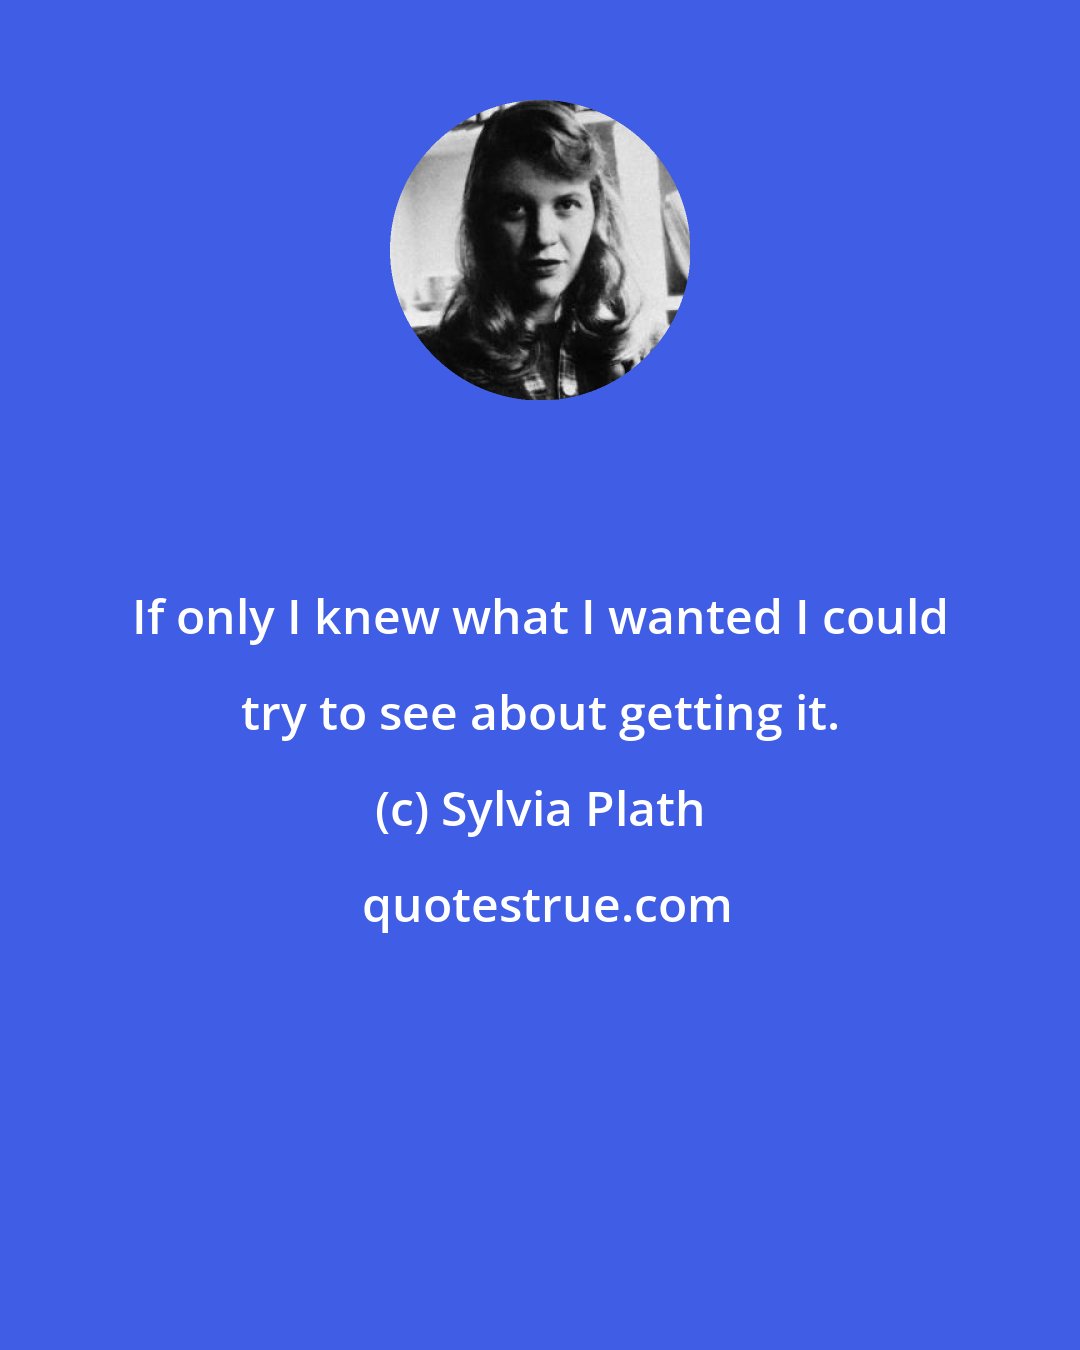 Sylvia Plath: If only I knew what I wanted I could try to see about getting it.